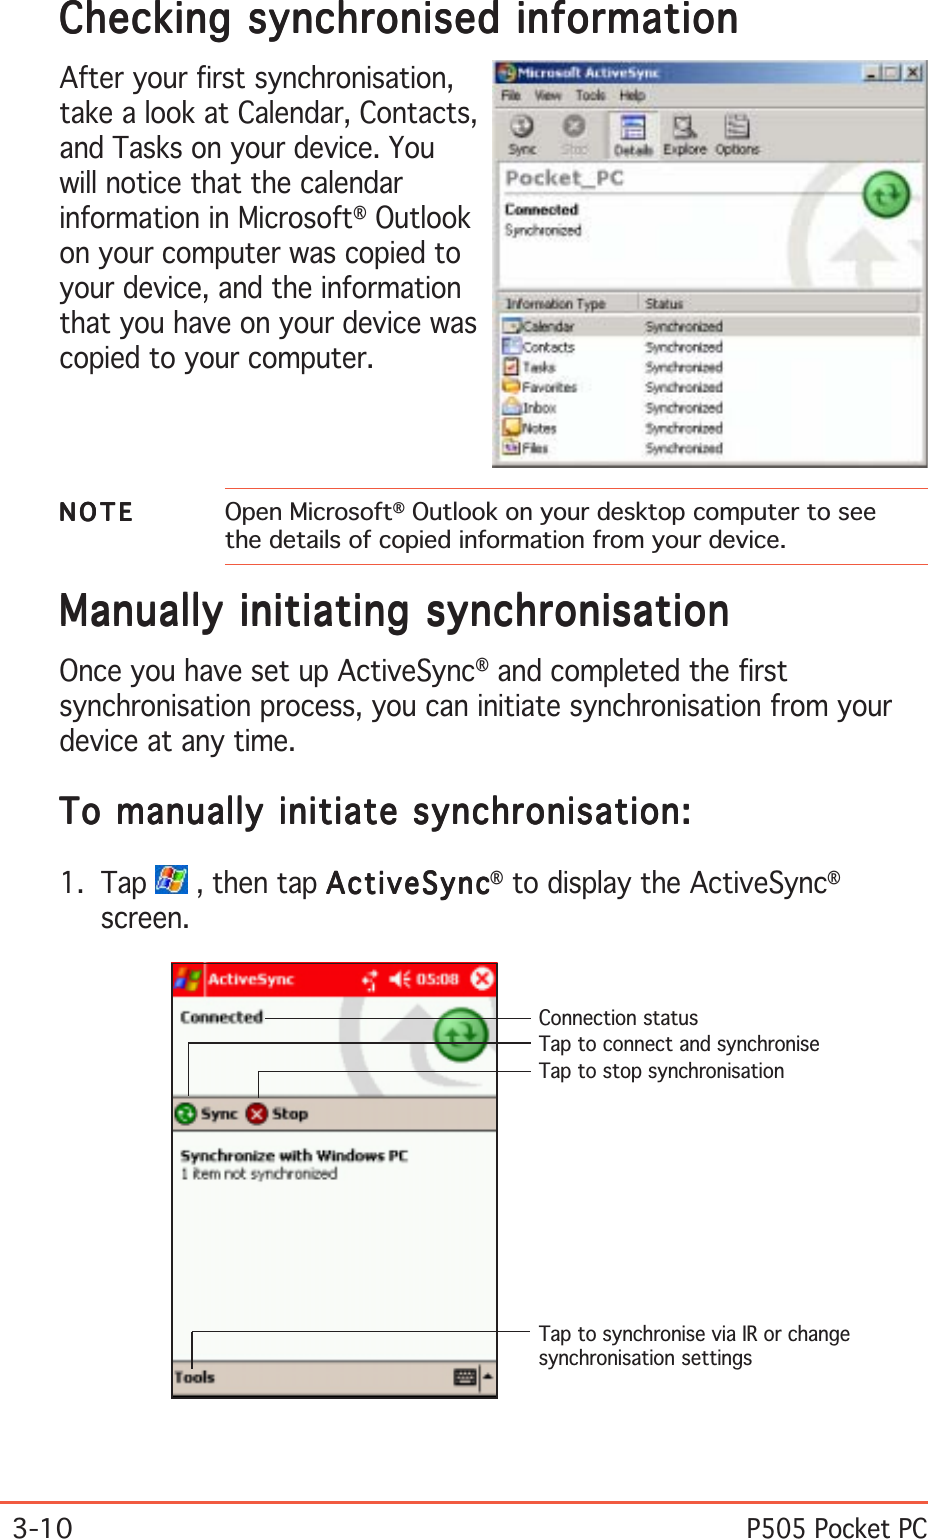 3-10P505 Pocket PCManually initiating synchronisationManually initiating synchronisationManually initiating synchronisationManually initiating synchronisationManually initiating synchronisationOnce you have set up ActiveSync® and completed the firstsynchronisation process, you can initiate synchronisation from yourdevice at any time.To manually initiate synchronisation:To manually initiate synchronisation:To manually initiate synchronisation:To manually initiate synchronisation:To manually initiate synchronisation:1. Tap   , then tap ActiveSyncActiveSyncActiveSyncActiveSyncActiveSync® to display the ActiveSync®screen.Connection statusTap to connect and synchroniseTap to stop synchronisationTap to synchronise via IR or changesynchronisation settingsChecking synchronised informationChecking synchronised informationChecking synchronised informationChecking synchronised informationChecking synchronised informationAfter your first synchronisation,take a look at Calendar, Contacts,and Tasks on your device. Youwill notice that the calendarinformation in Microsoft® Outlookon your computer was copied toyour device, and the informationthat you have on your device wascopied to your computer.NOTENOTENOTENOTEN O T E Open Microsoft® Outlook on your desktop computer to seethe details of copied information from your device.